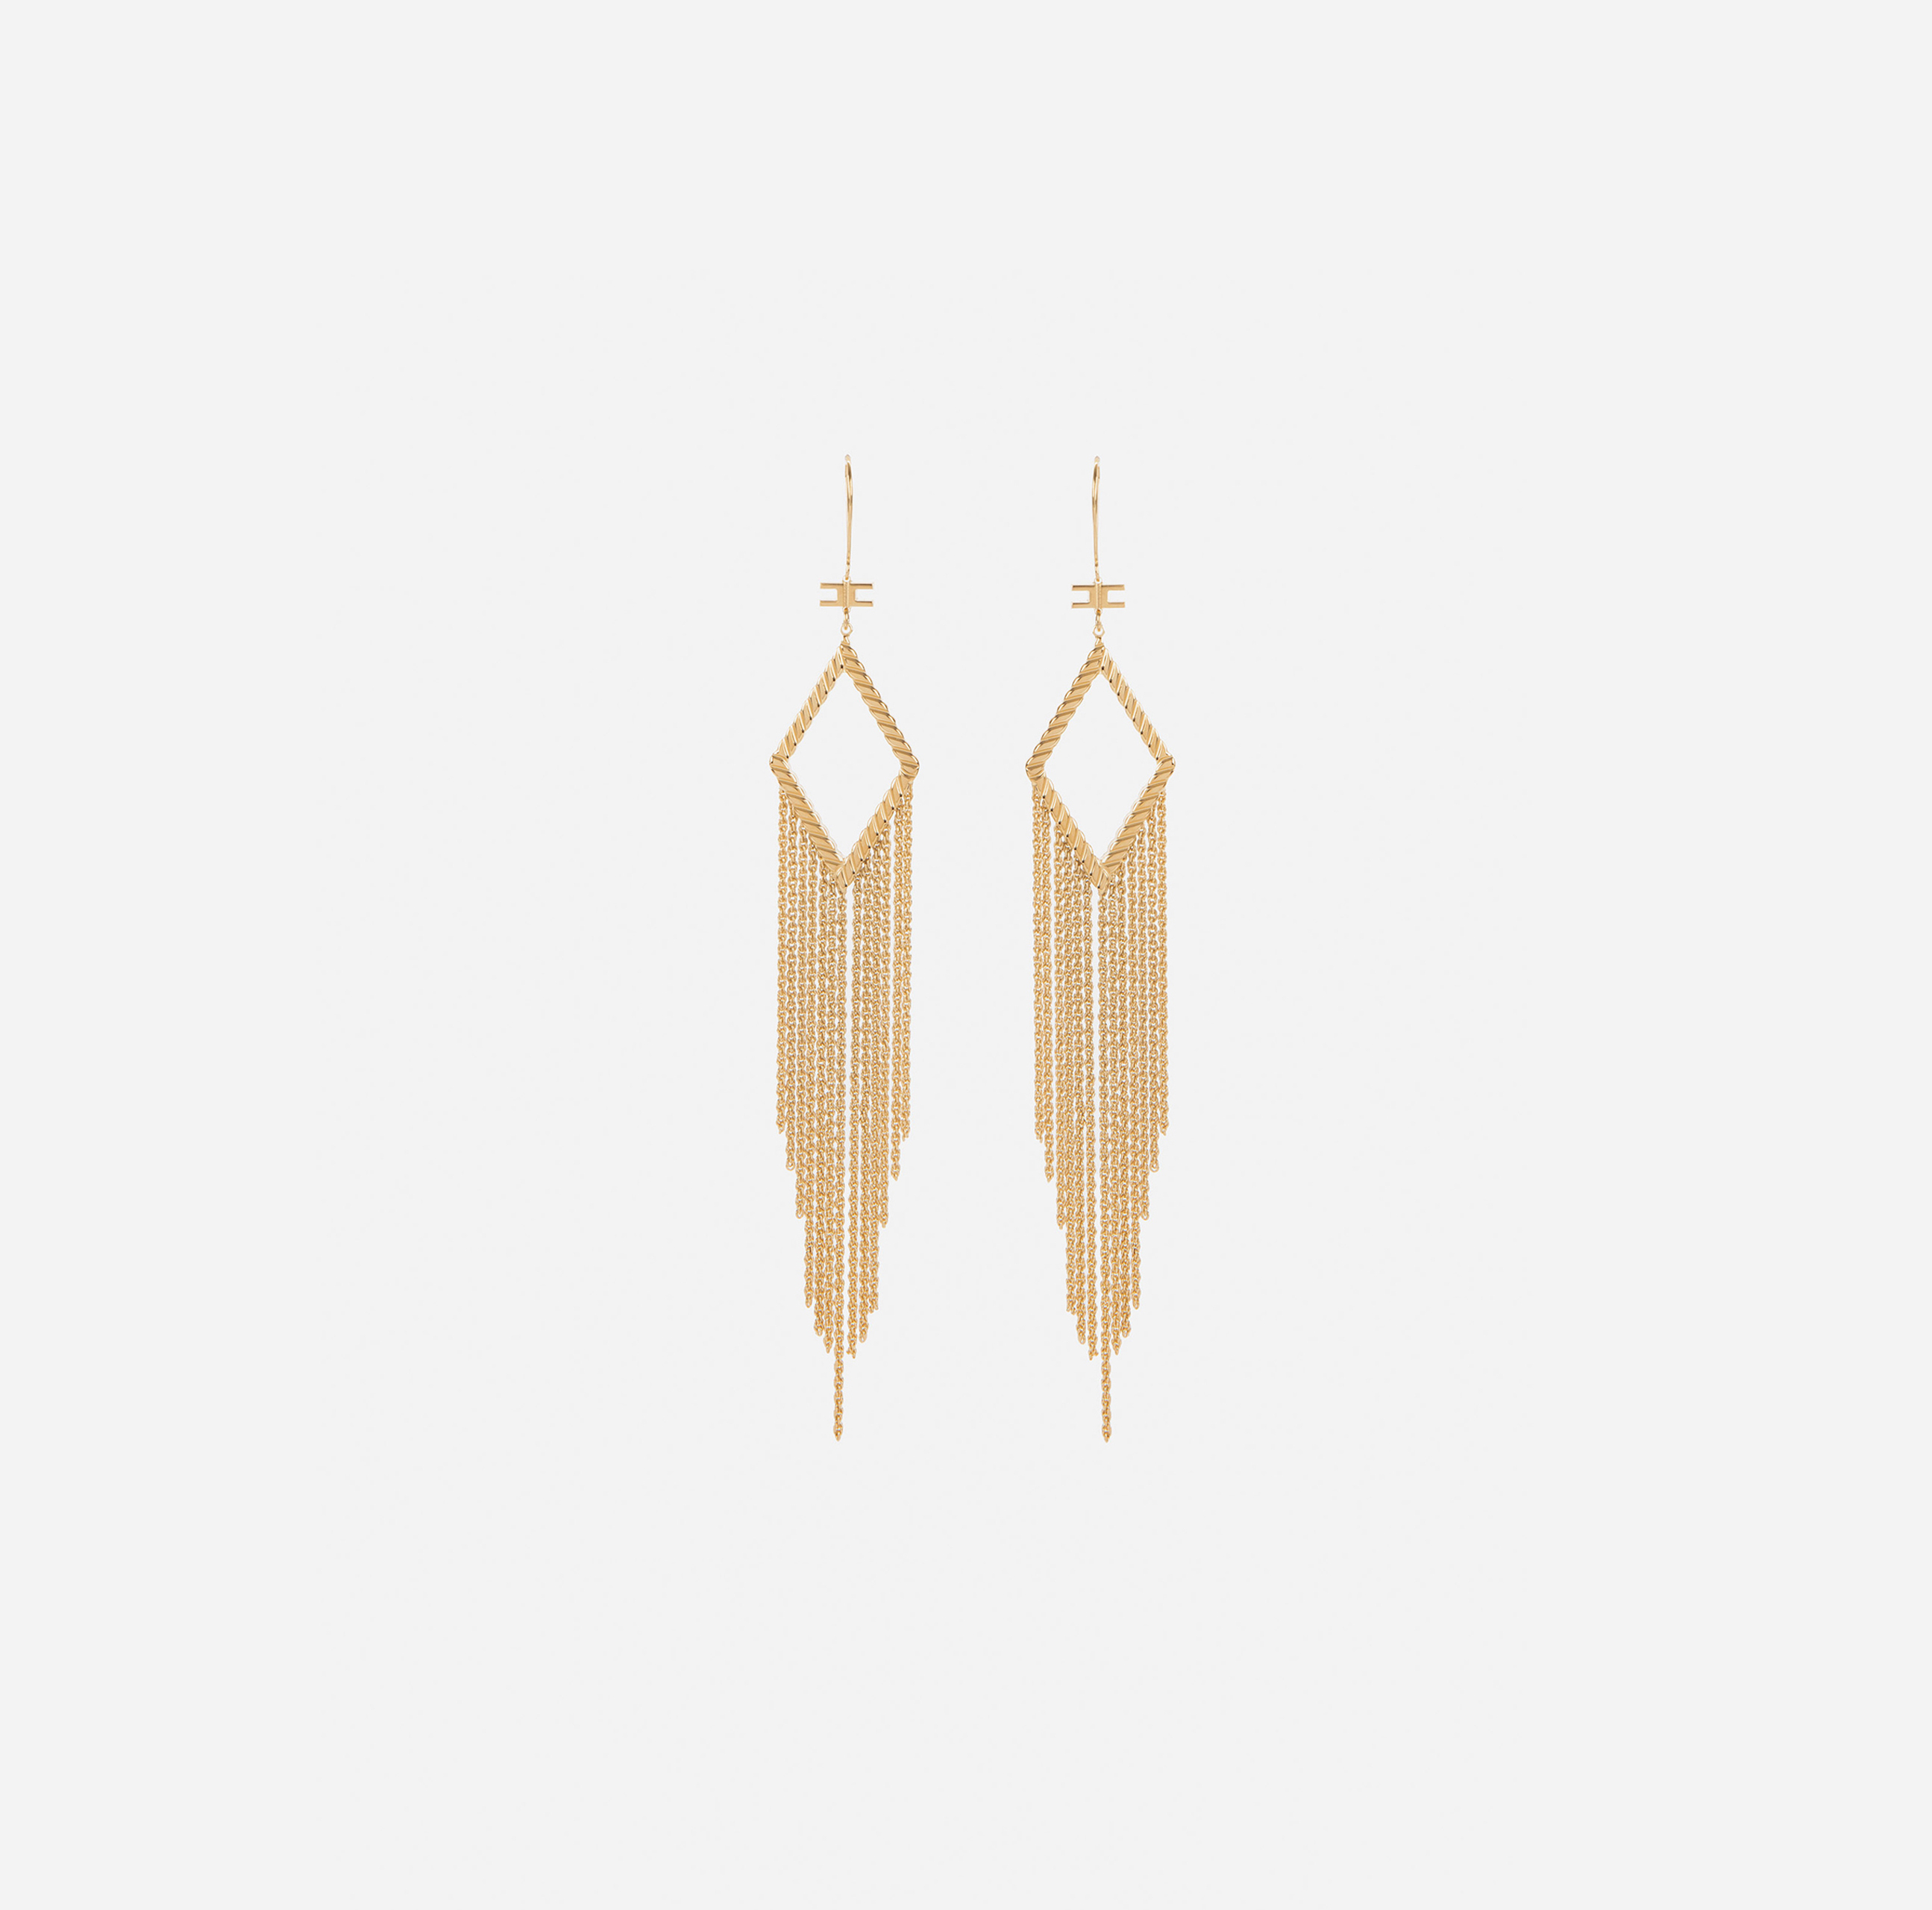 Rhombus earring with chains - Elisabetta Franchi